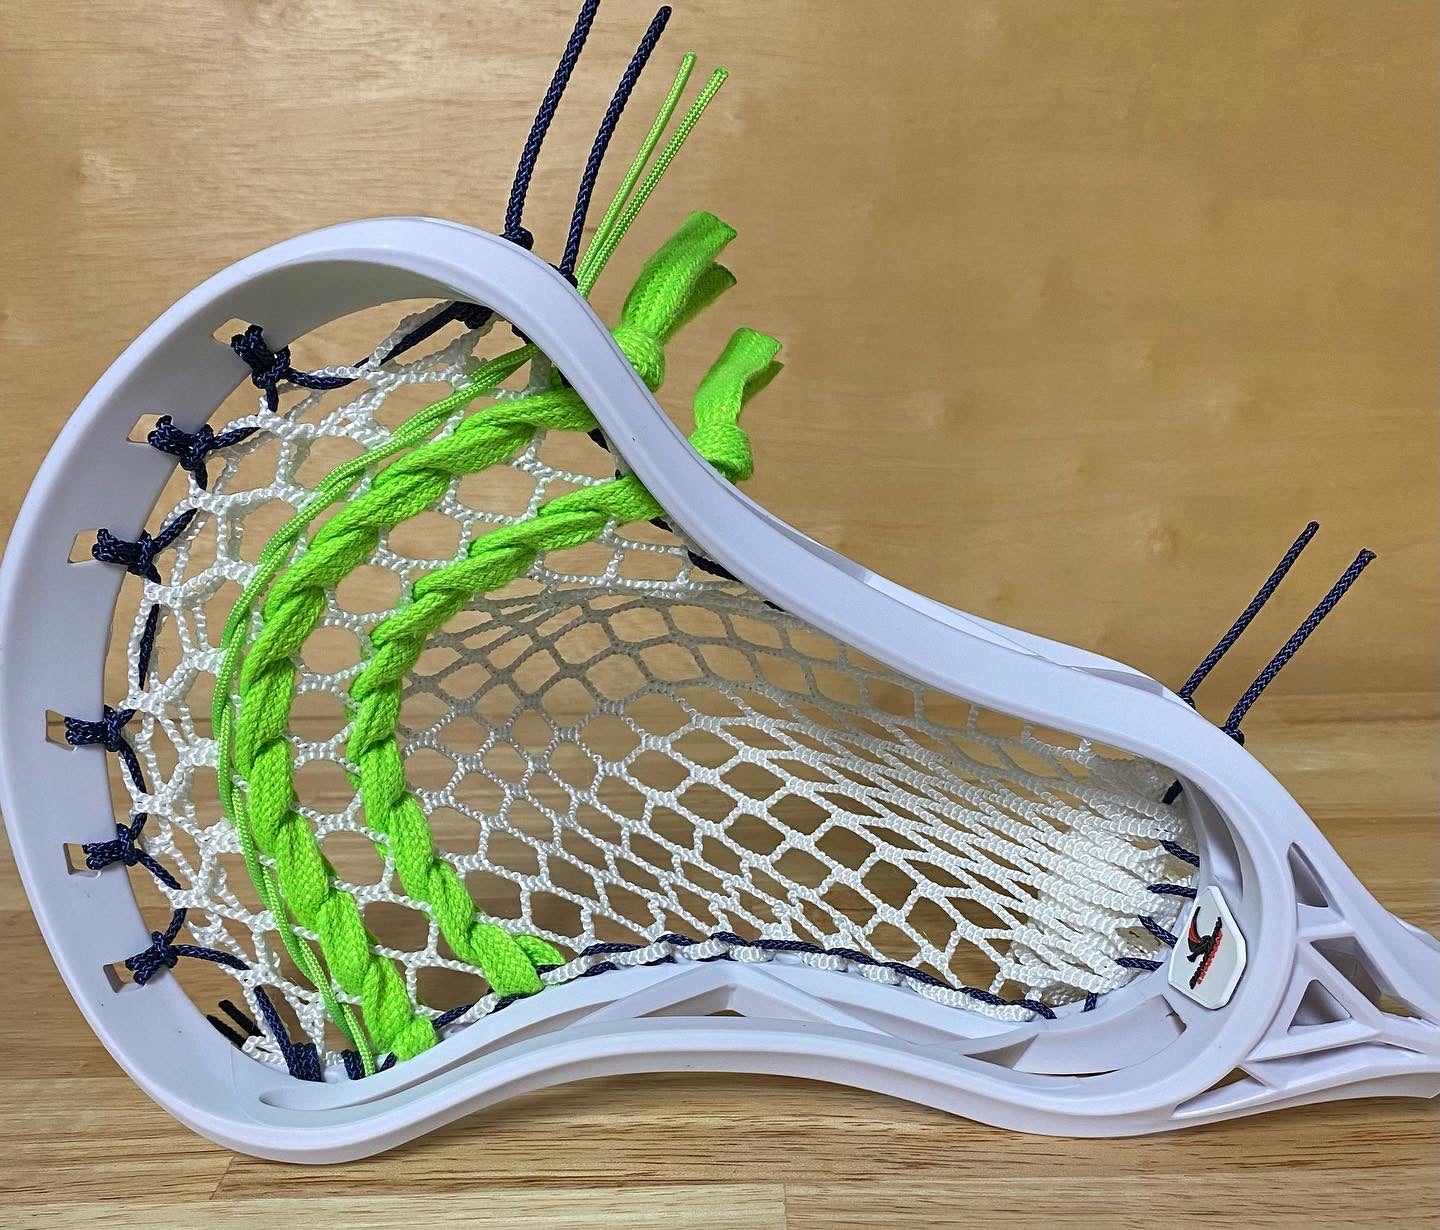 Silverfin Lacrosse Mesh Compatible with All Lacrosse Heads 